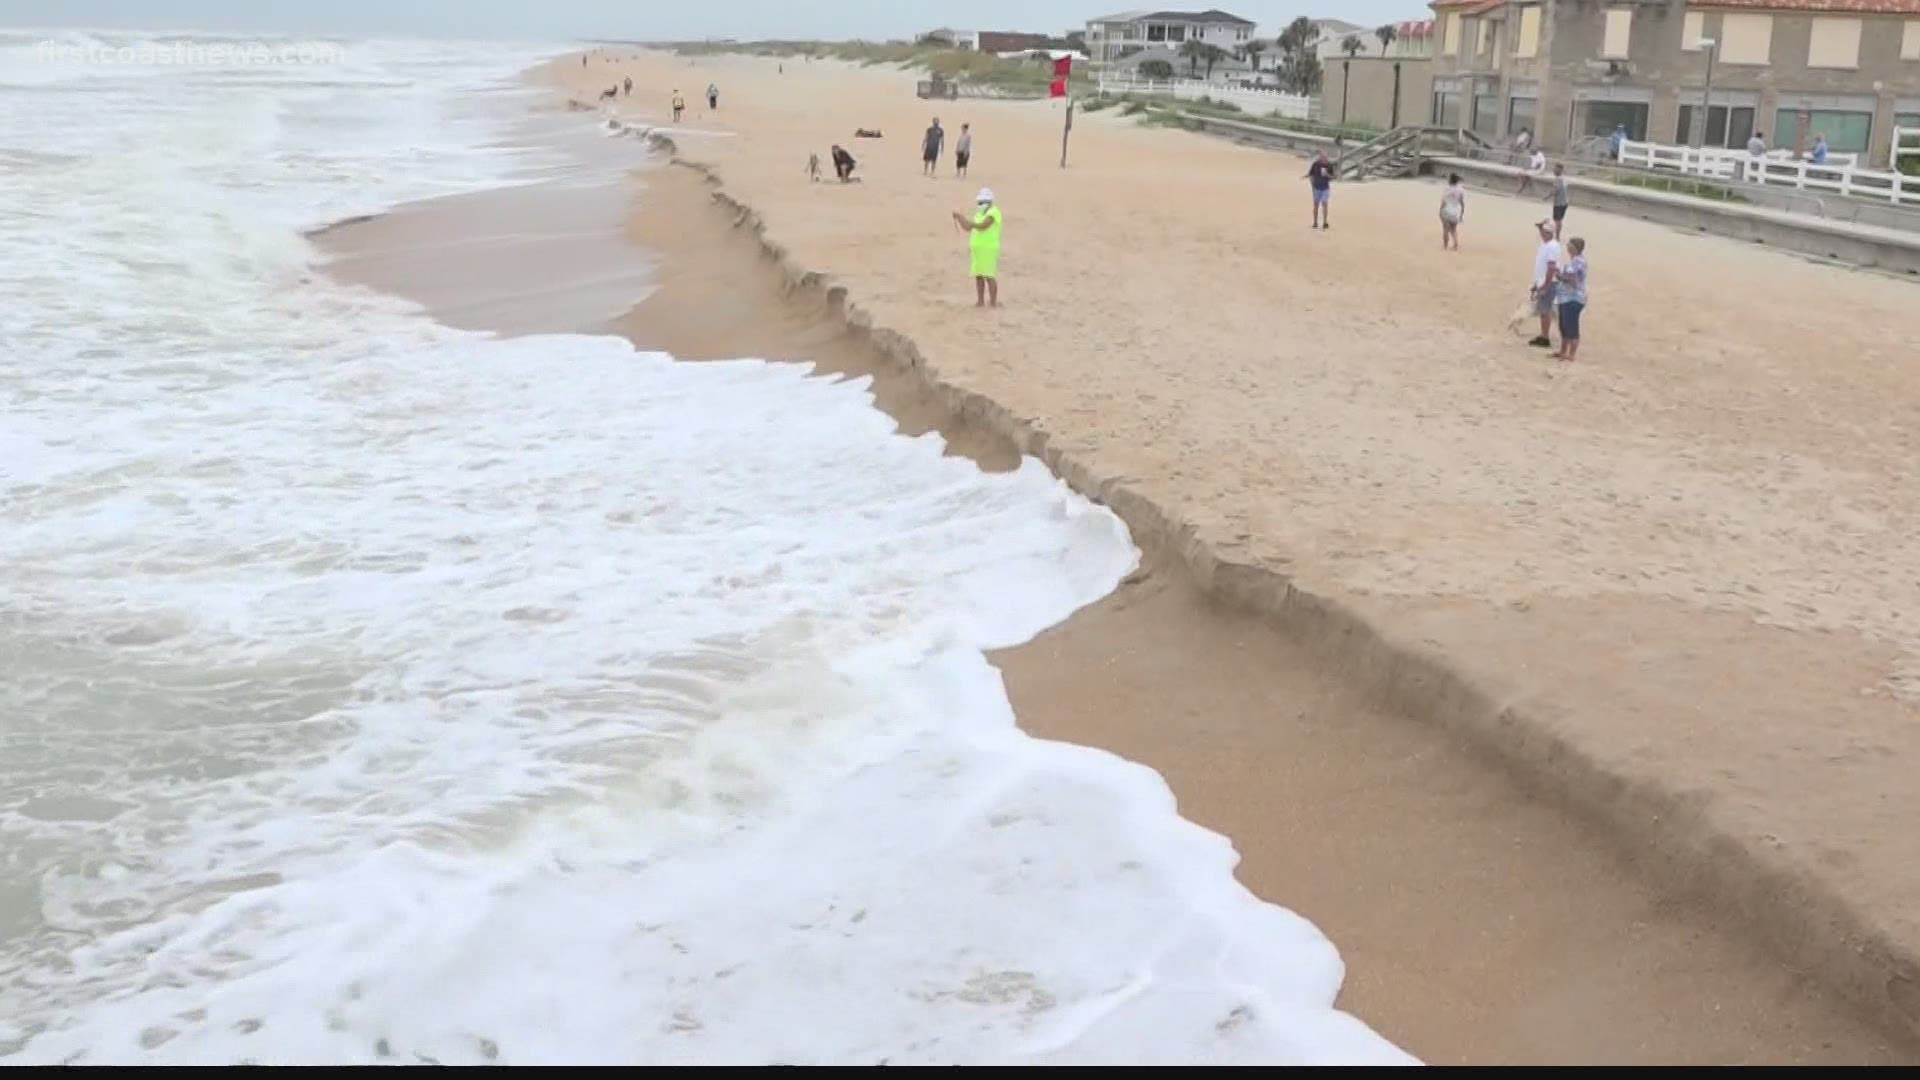 While the First Coast was largely spared from much rain or flooding, there were some impacts at the area's beaches, with high surf and erosion.